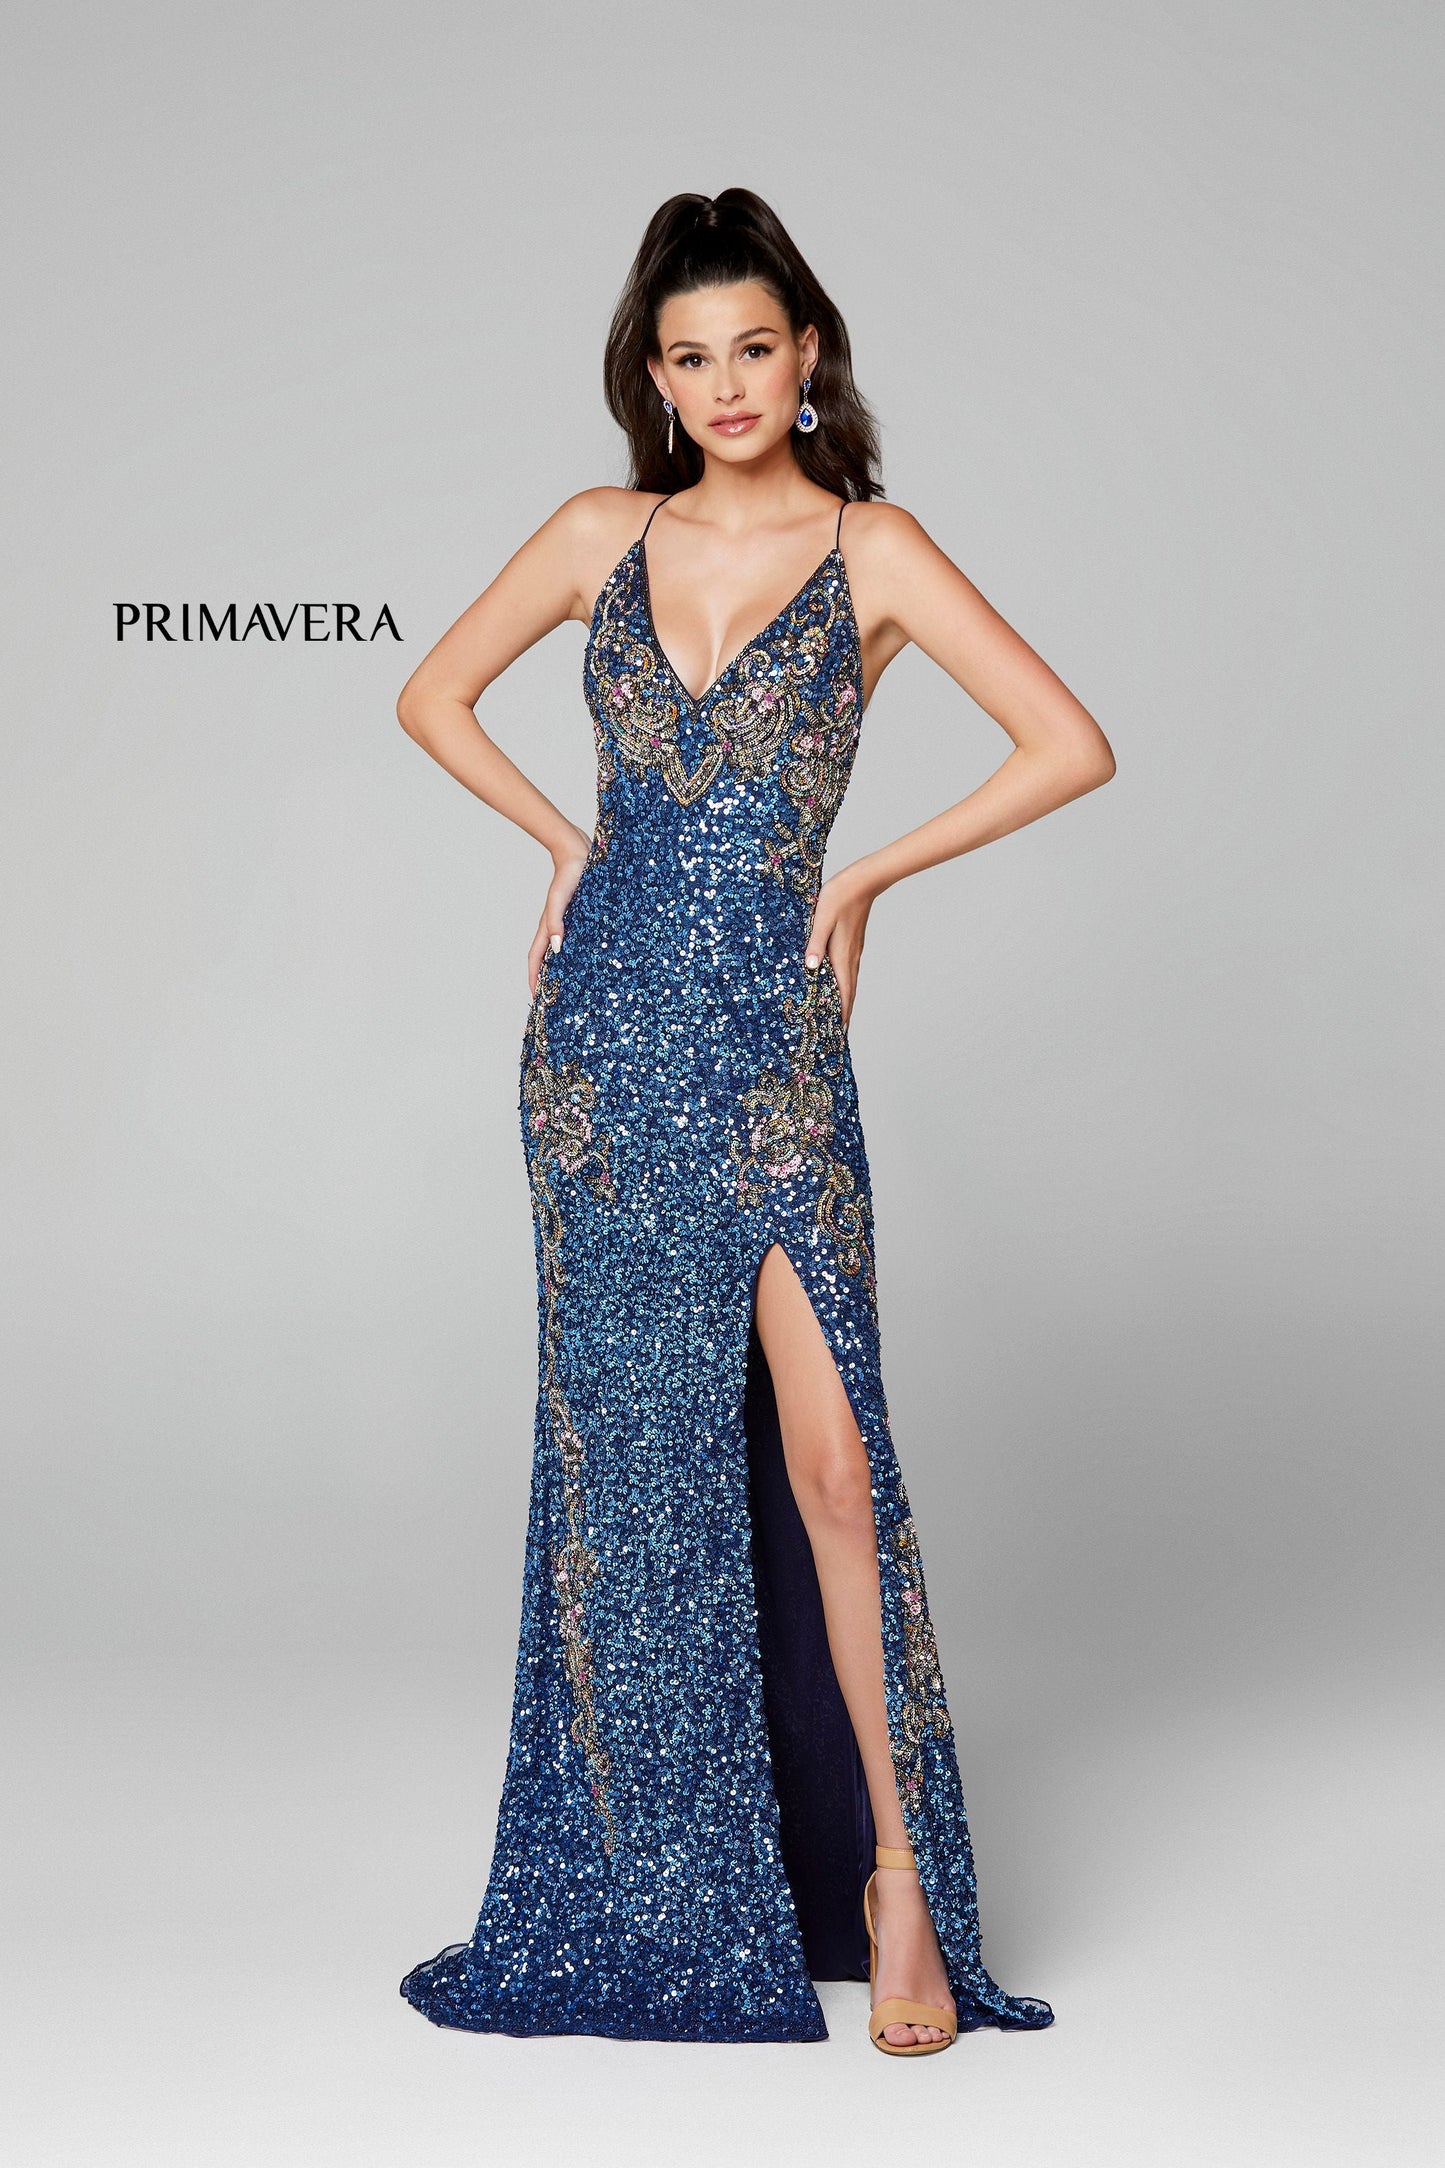 Primavera Couture 3211 Size 4 Platinum Sequin Prom Dress Pageant Gown Evening Formal Wear Side Slit